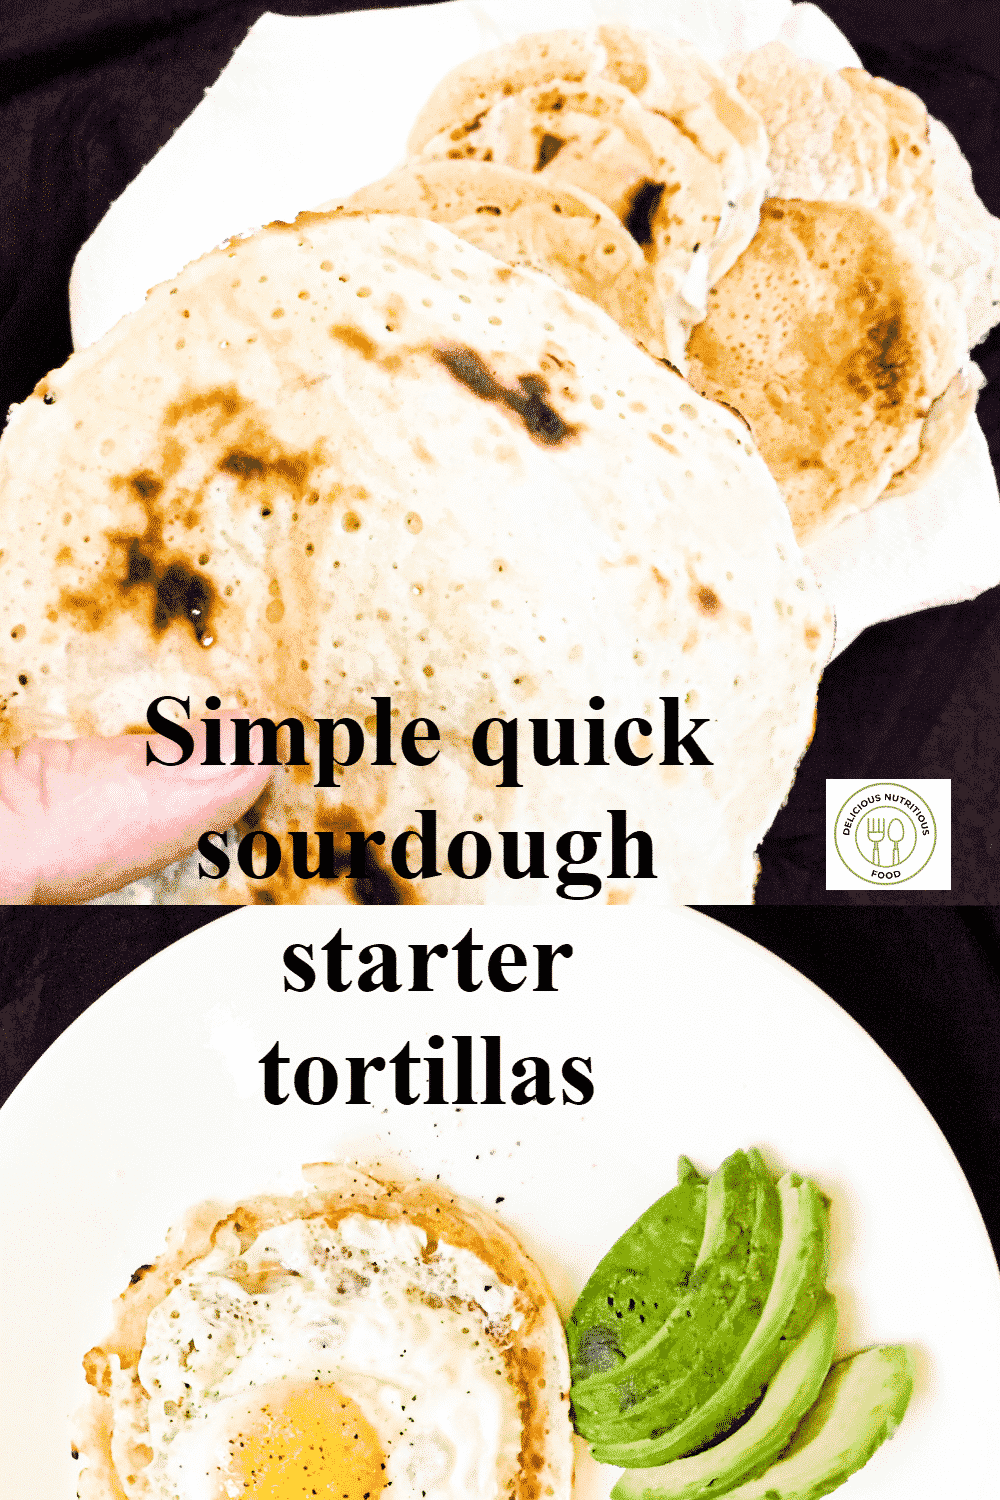 Delicious Nutritious food, love this simple quick not rolled sourdough starter tortillas #bread #flatbread #softtaco #sourdough #sourdoughbread #Sourdoughstartertortillas #tortillas  #healthy #simple #fromscratch #delicious #nutritious #foodie #comfortmeal #homemade #recipies #breakfast #lunch #dinner #easymeal #deliciousnutritiousfoods  #breakfastrecipes #healthybreakfast #whole30breakfast #yummybreakfast #castironrecipes #castironskillet #healthymaindish #simplehealthylunchrecipes #simplehealthydinnerrecipes #dinner #easylunchrecipe #sourdoughbreadrecipe #sourdoughbread #sourdoughrecipesstarter #sourdoughtortillas #sourdoughdiscardrecipe #naan #flatbread #softtaco #3ingredientsrecipes #recipesilove #tortillasdinner #healthytortillas #tortillasrecipe #homemadebread #breadrecipes #healthy #simple #fromscratch #delicious #nutritious #homemadefood
#quickstarter #sourdough #sour-dough #sourdoughs #quicksourdough #sourdoughsofttaco #sourdoughdiscardtortillas #fastsourdoughbread #sourdoughstartertortillas #sourdoughtortillasrecipe #sourdoughflourtortillas #fastsourdoughbreadrecipe #homemadesourdoughtortillas #quicksourdoughstarterrecipe #wholewheatsourdoughtortillas #quickeasysourdoughstarter #sourdoughquick 
  #Maintainingsourdoughstarter #howtomaintainasourdoughstarter #sourdoughflatbreads #sourdoughflatbreadrecipe #sourdoughflatbread #howtofeedsourdoughstarter #feedingsourdoughstarter #feedingsourdough #feedingasourdoughstarter #feedingsourdoughstarter #fedsourdoughstarter #sourdoughdiscardflatbread #sourdoughstarterfeeding #sourdoughtortilla #sourdoughstarterhowtofeed #sourdoughstartermaintenance 